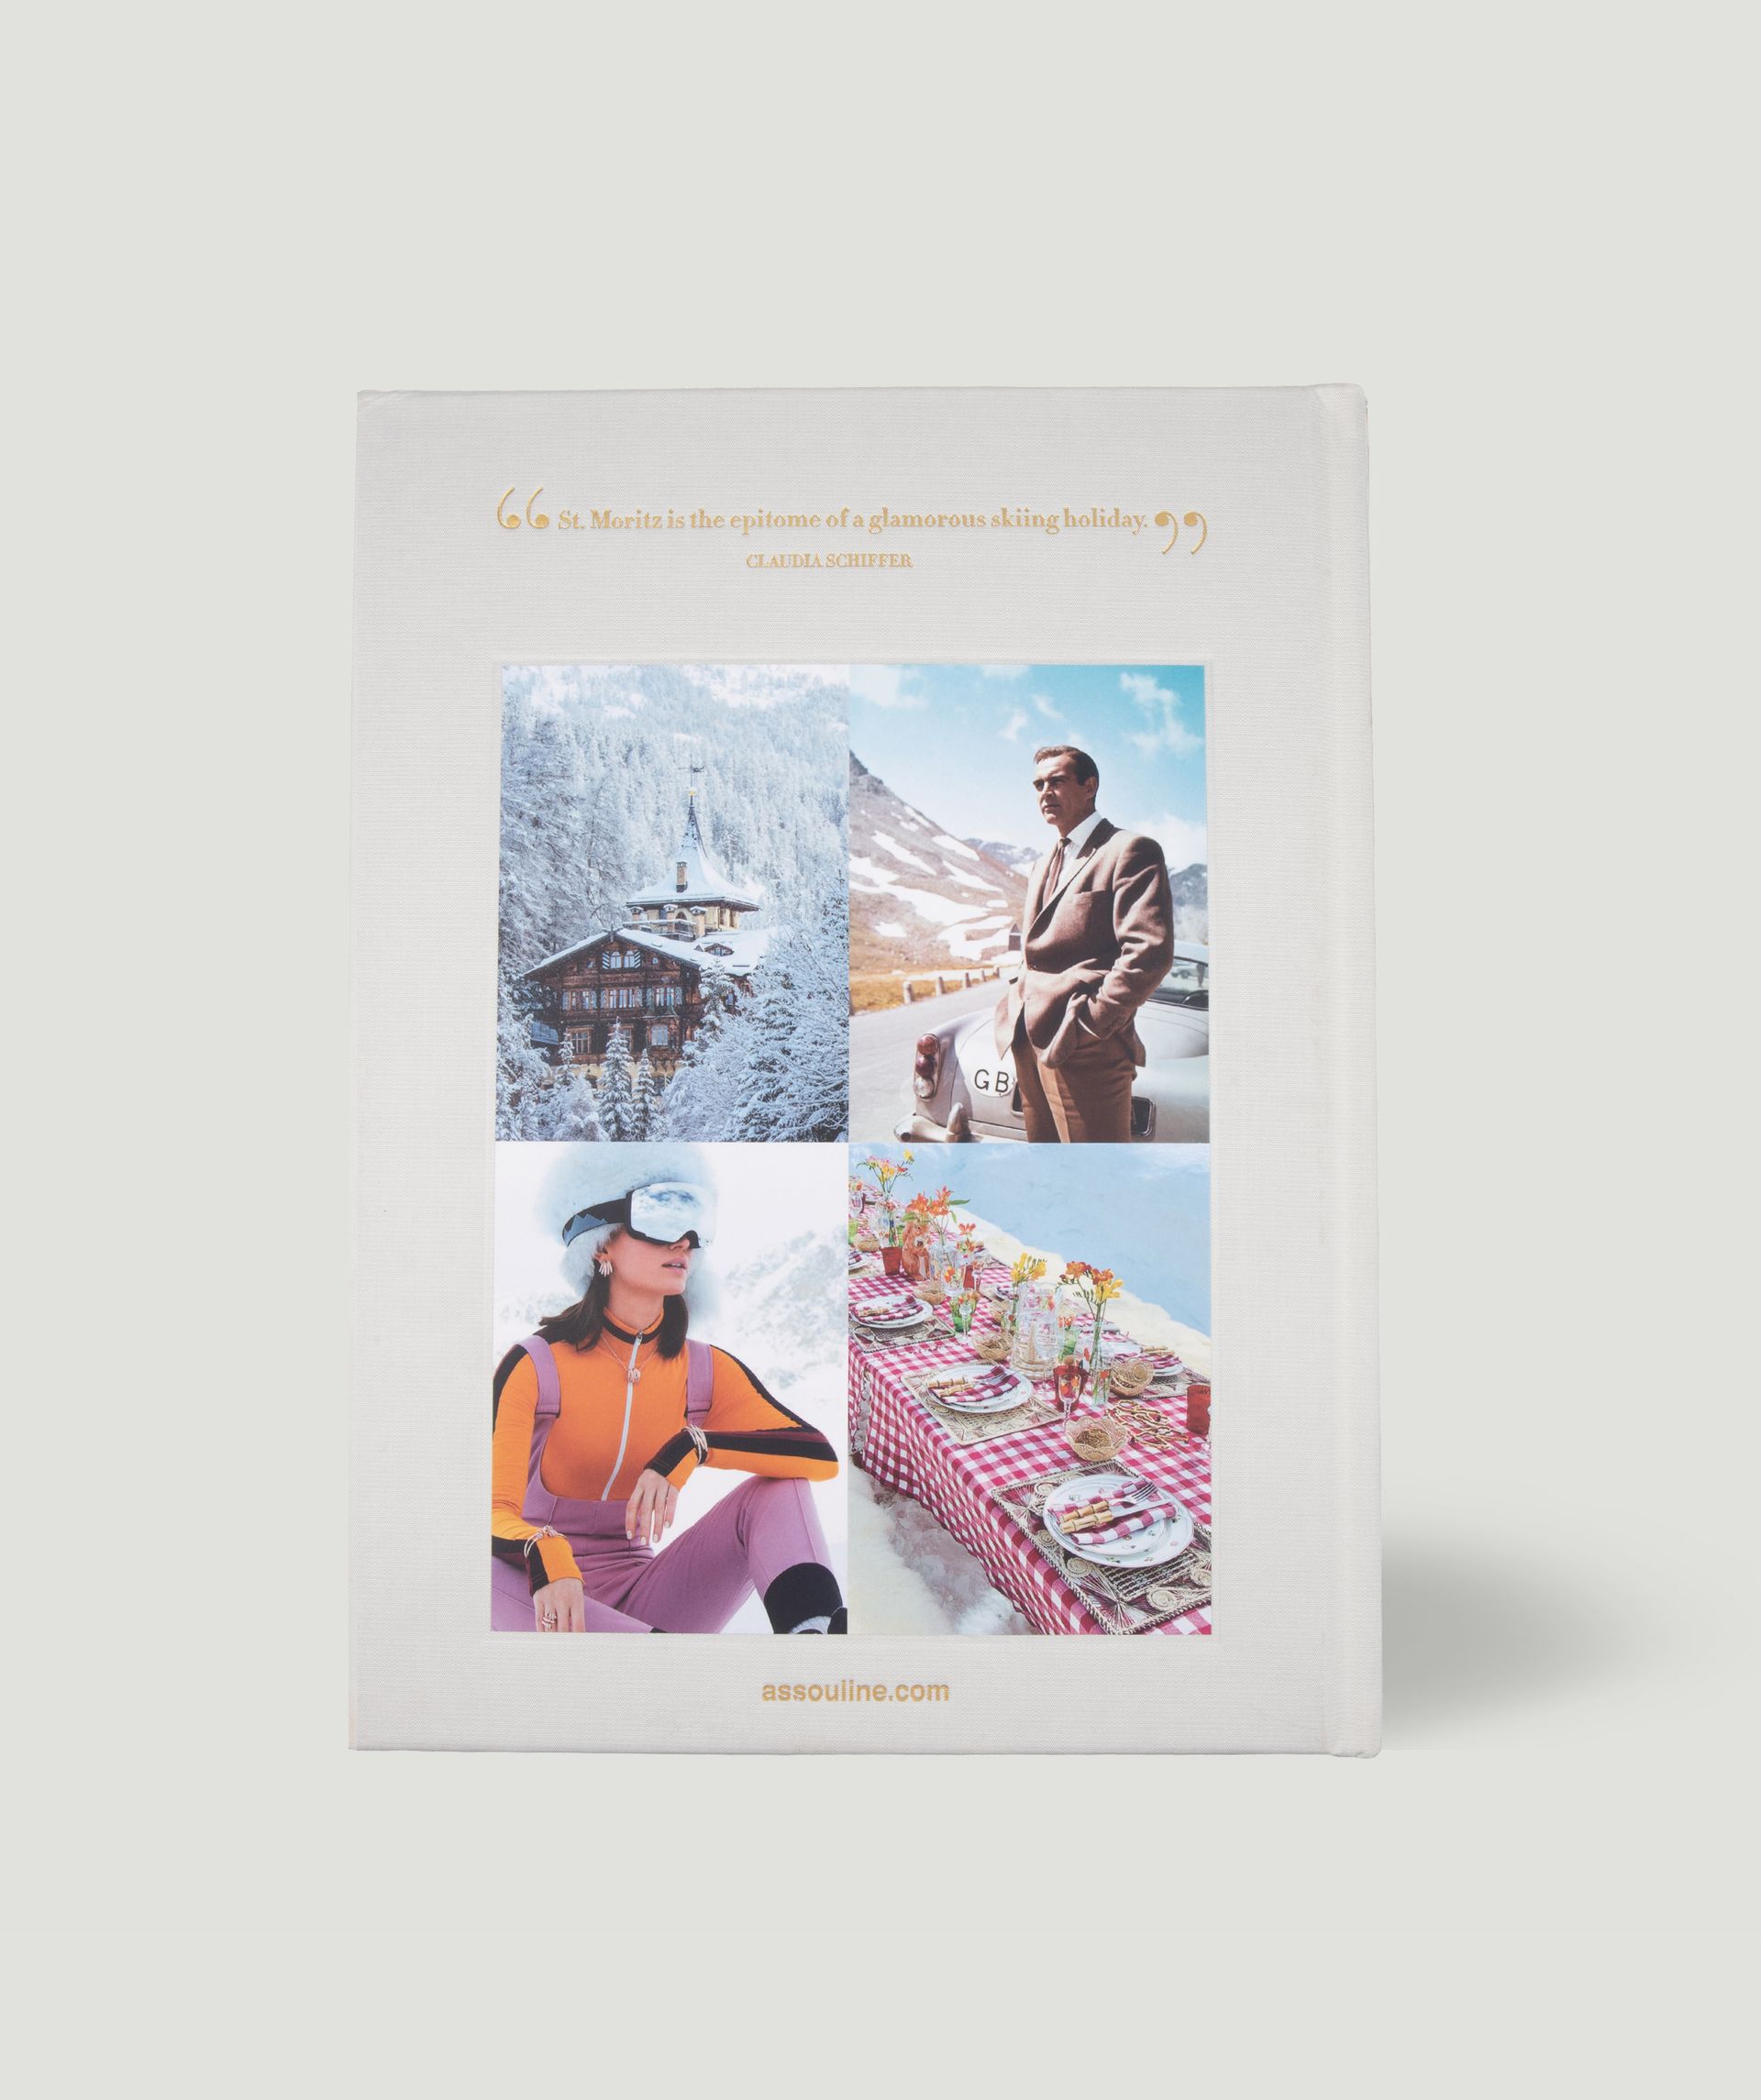 St. Moritz Chic coffee table book